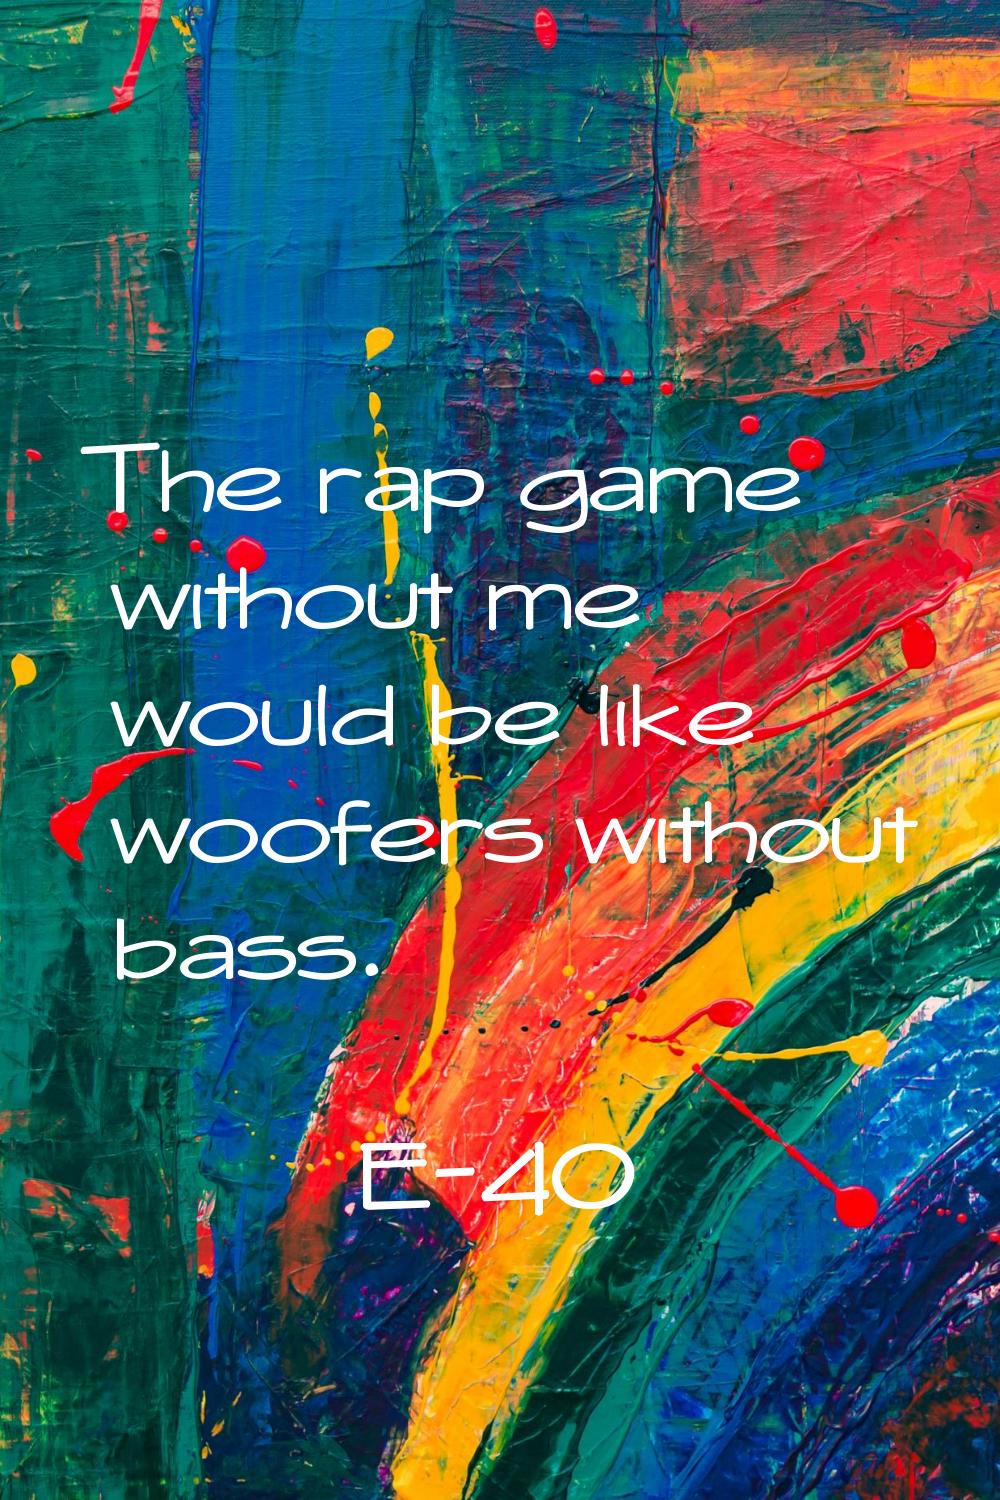 The rap game without me would be like woofers without bass.